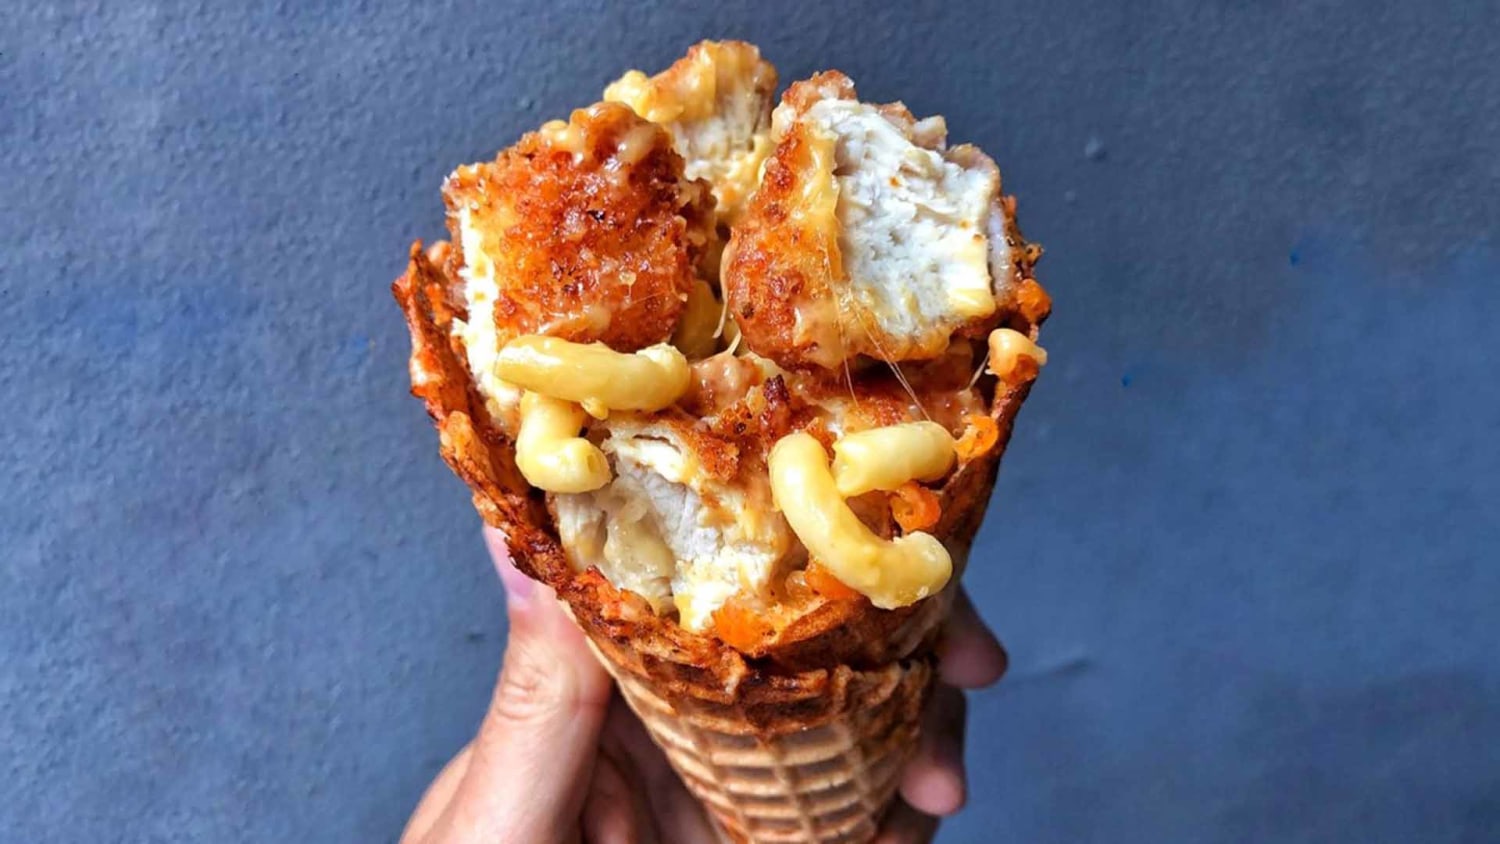 Fried chicken waffle cones at Chick'nCone in New York City